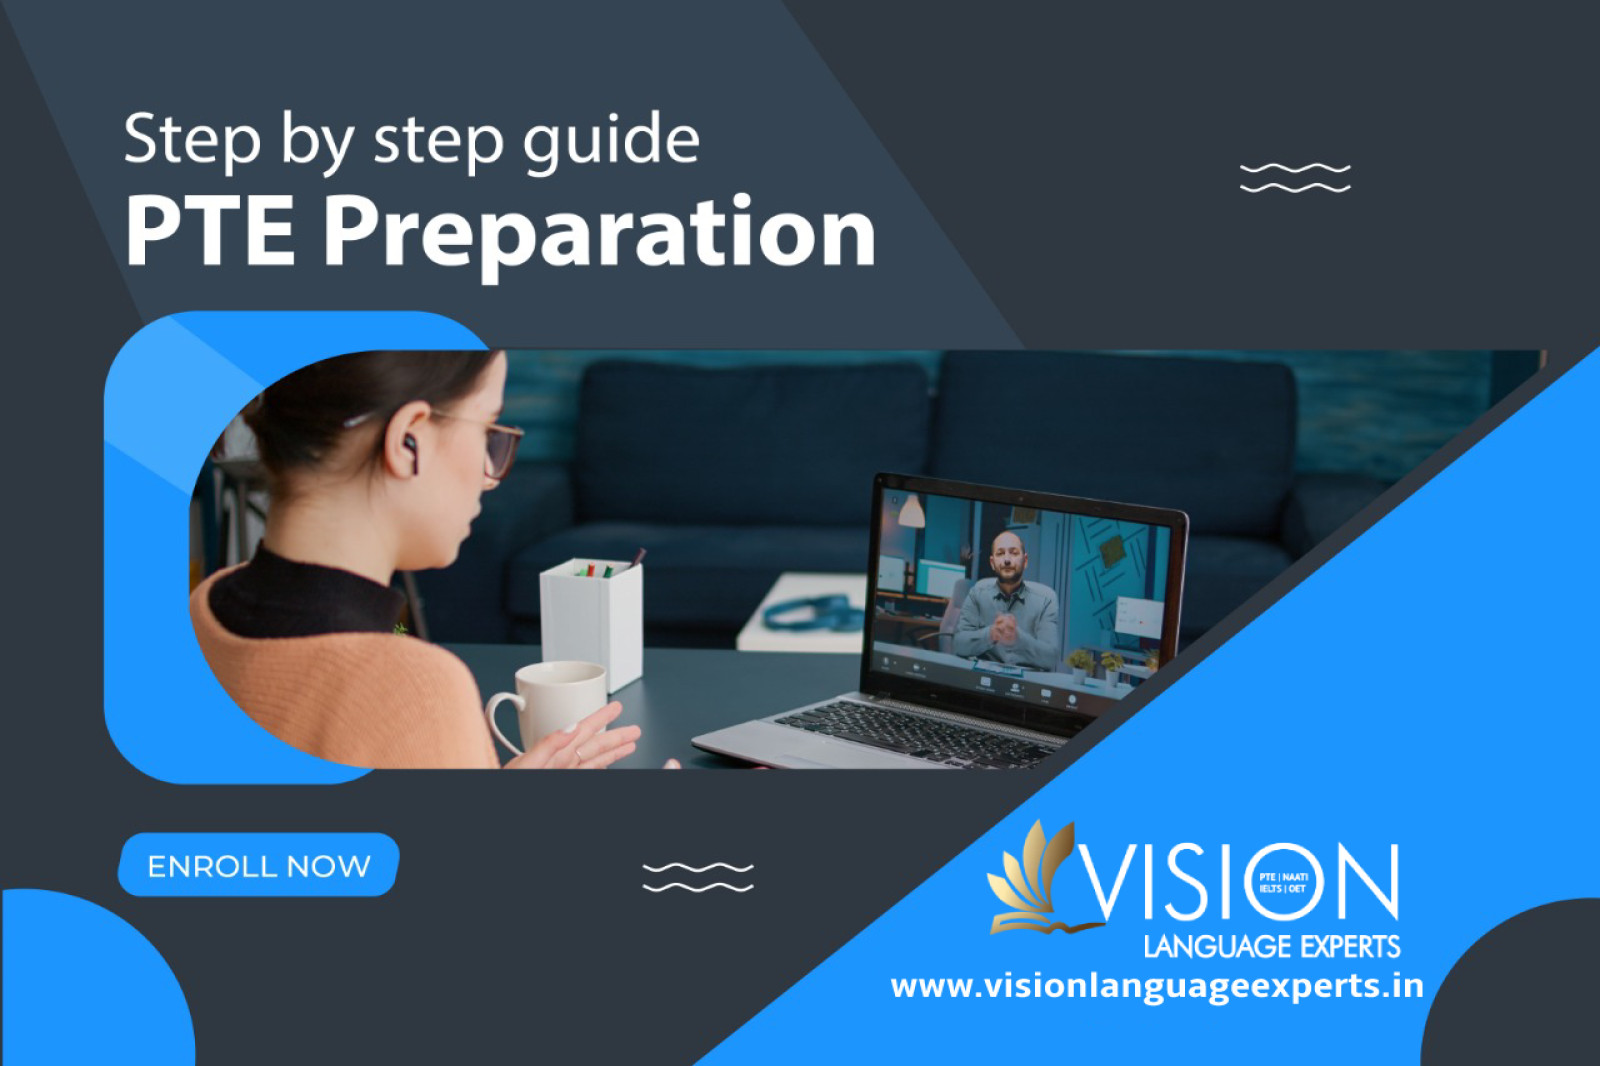 Step-by-step guide PTE preparation